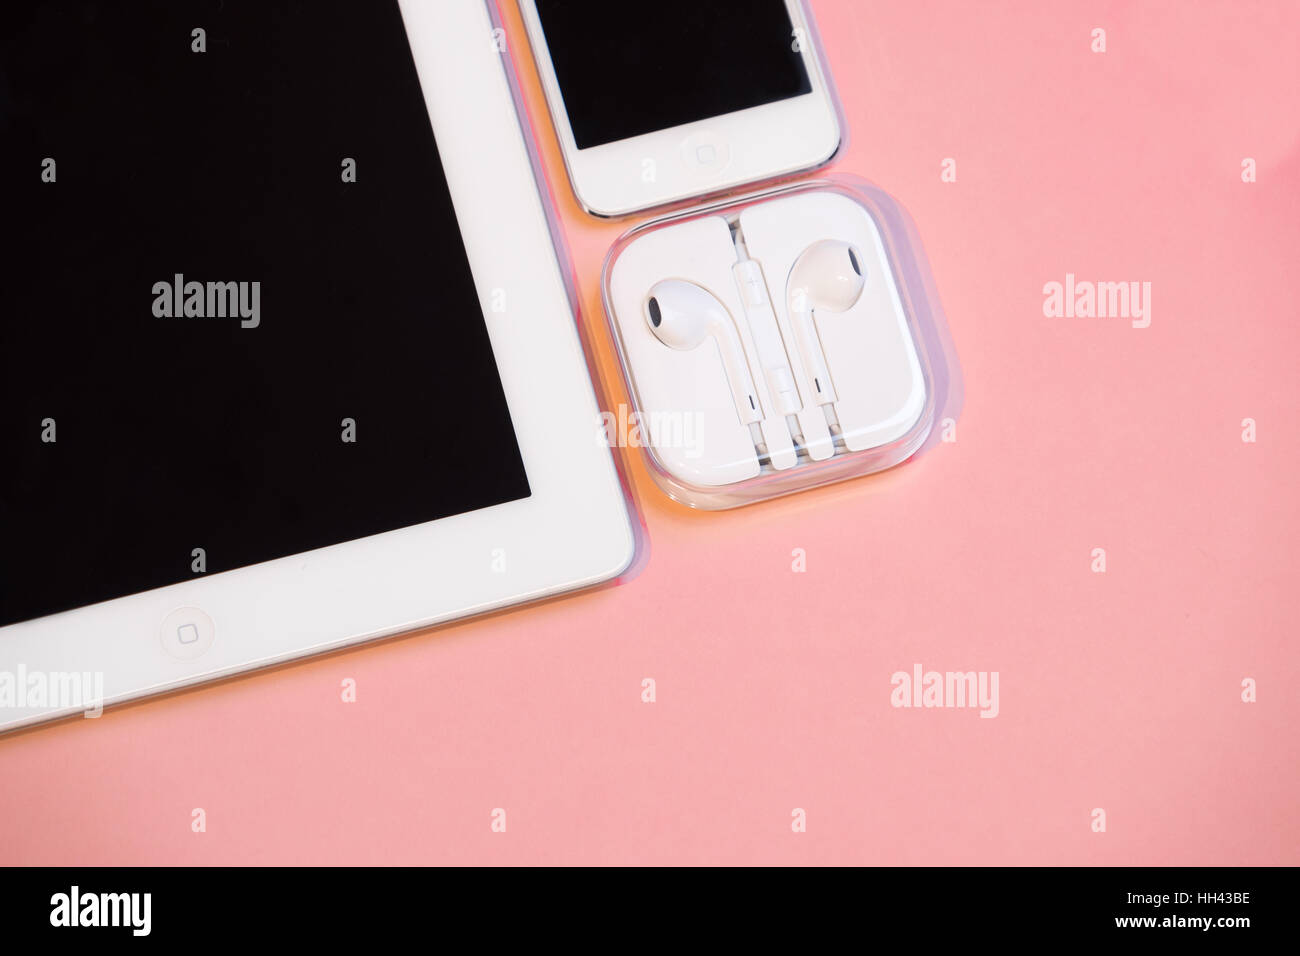 Smart phone, tablet and headphones against pink background Stock Photo